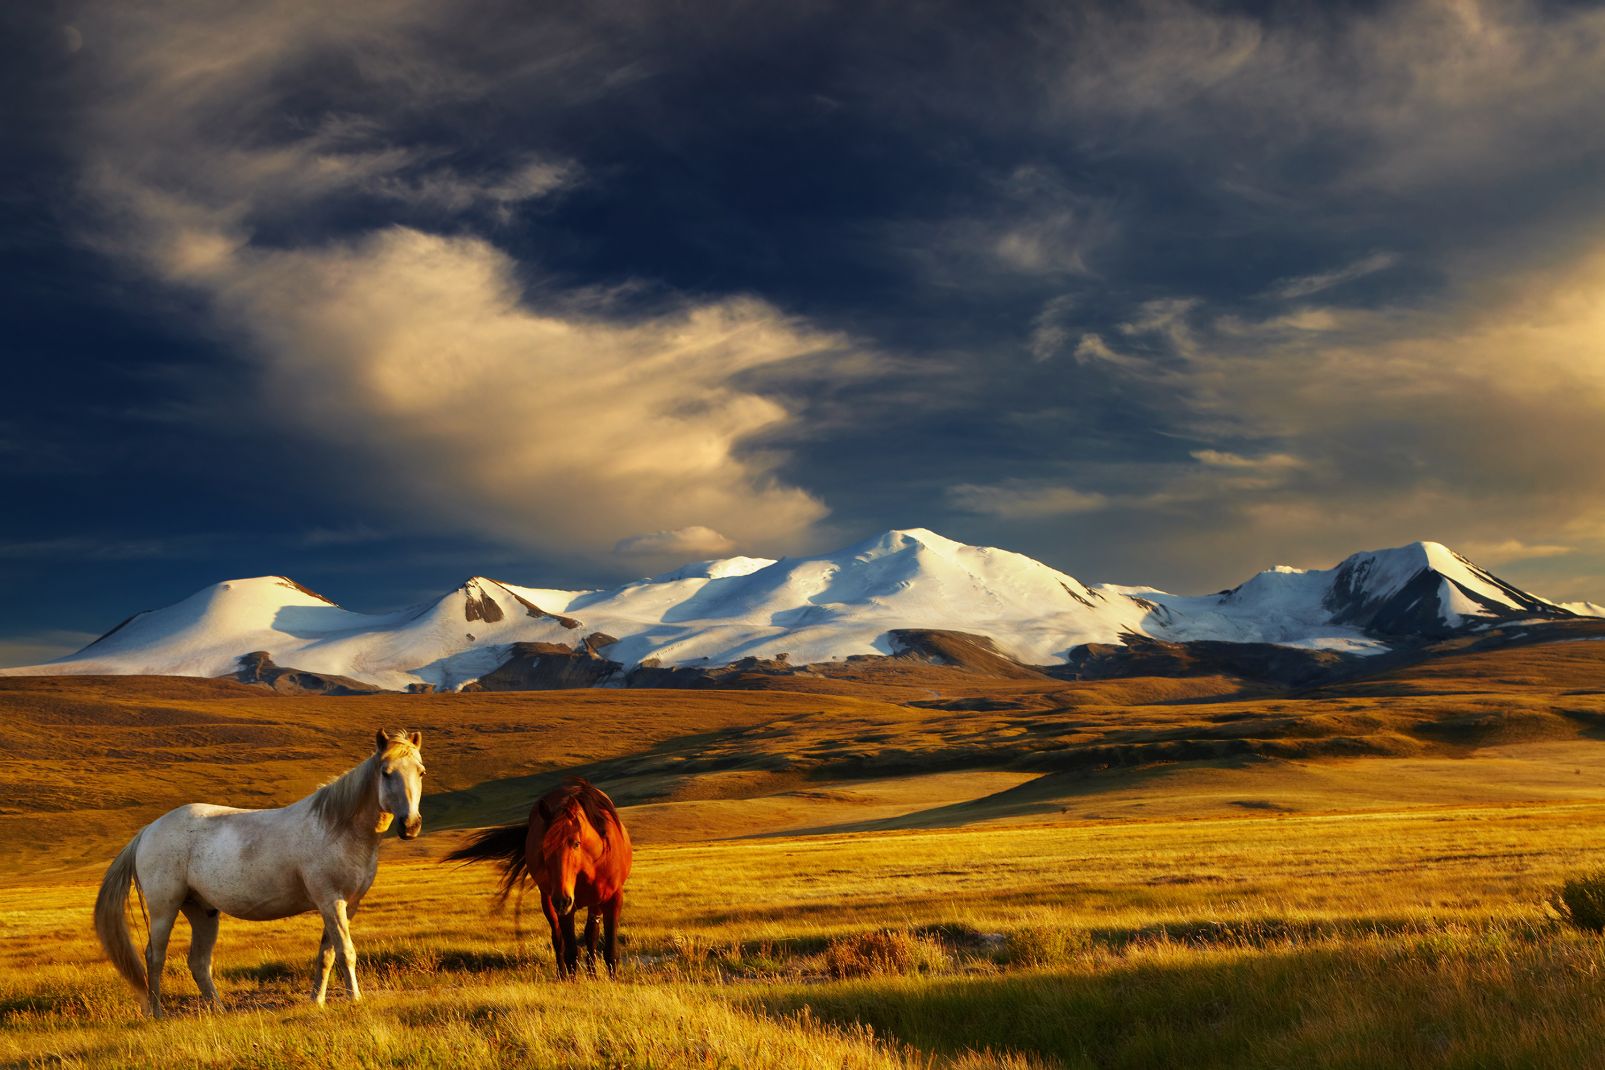 mongolia tourism package